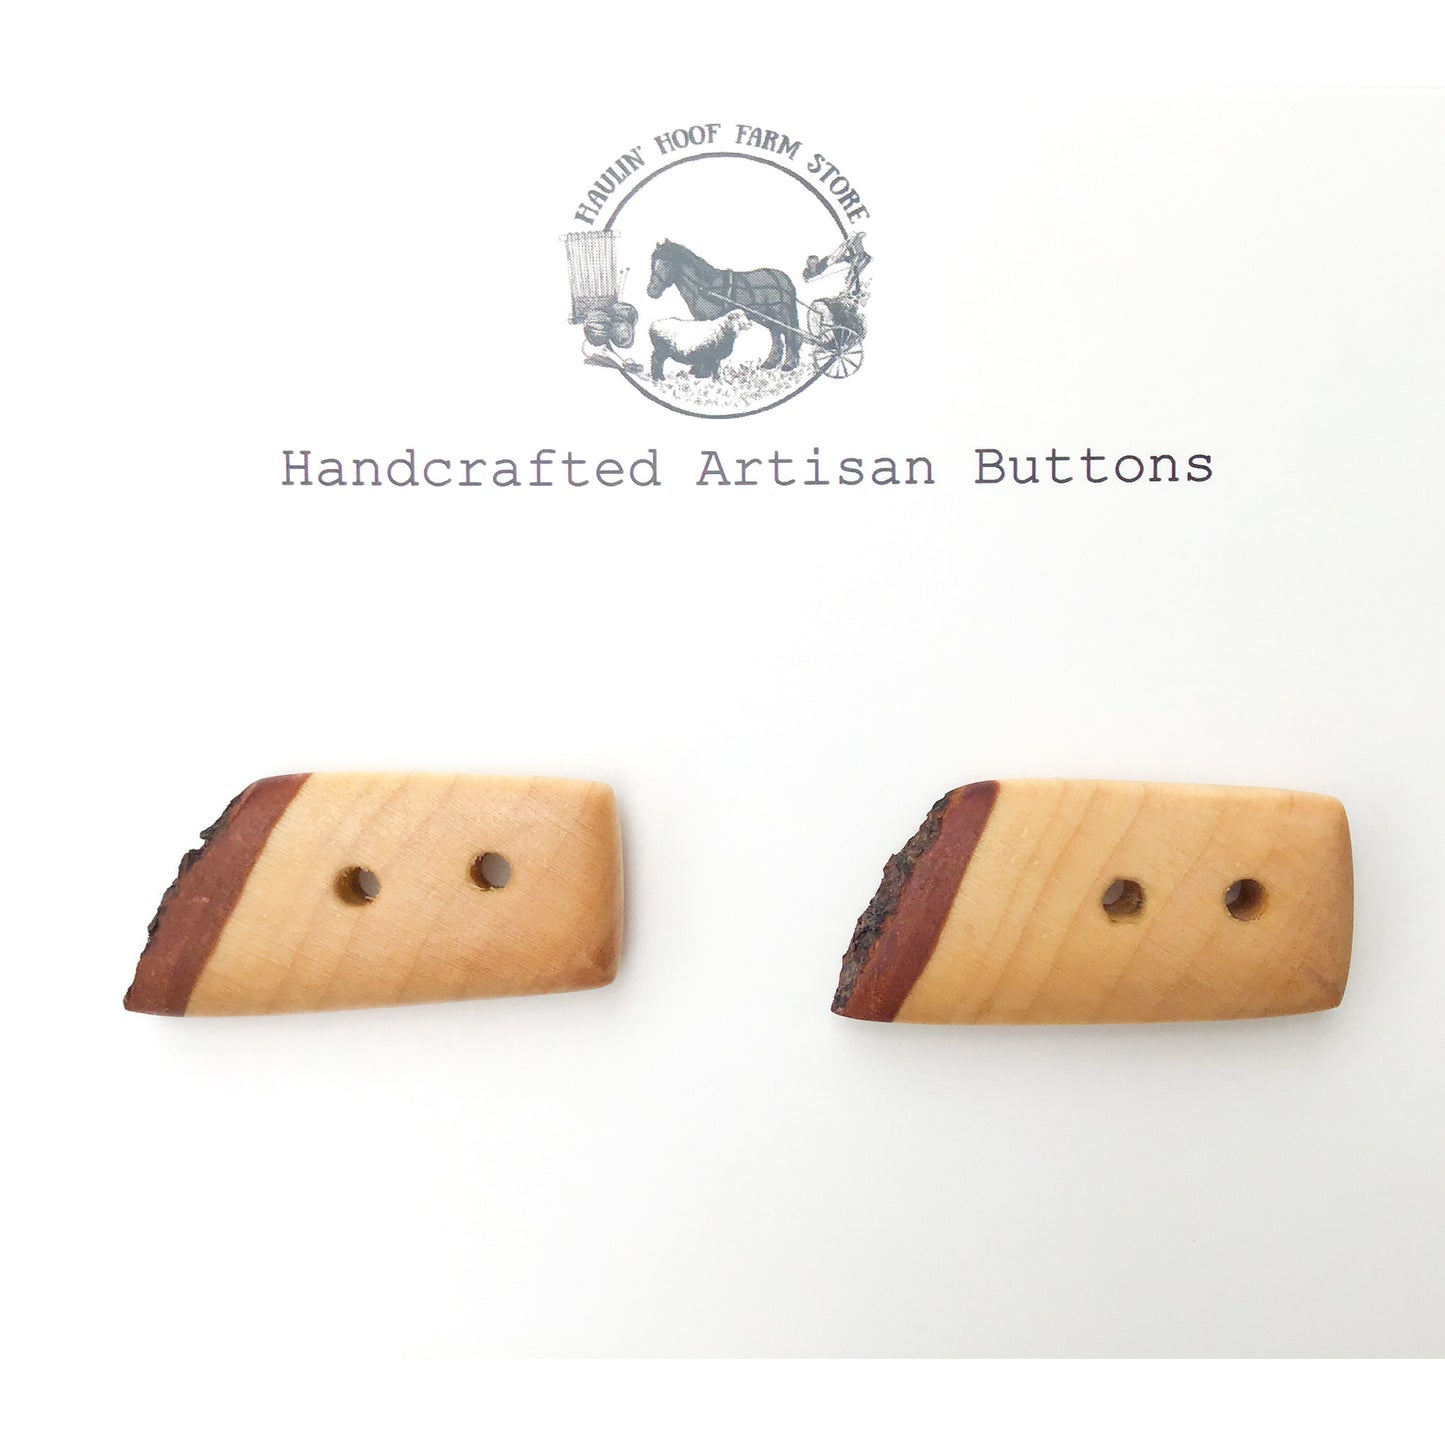 Live Edge Hard Maple Wood Buttons - Wooden Toggle Buttons - 3/4" x 1 1/2" - 2 Pack